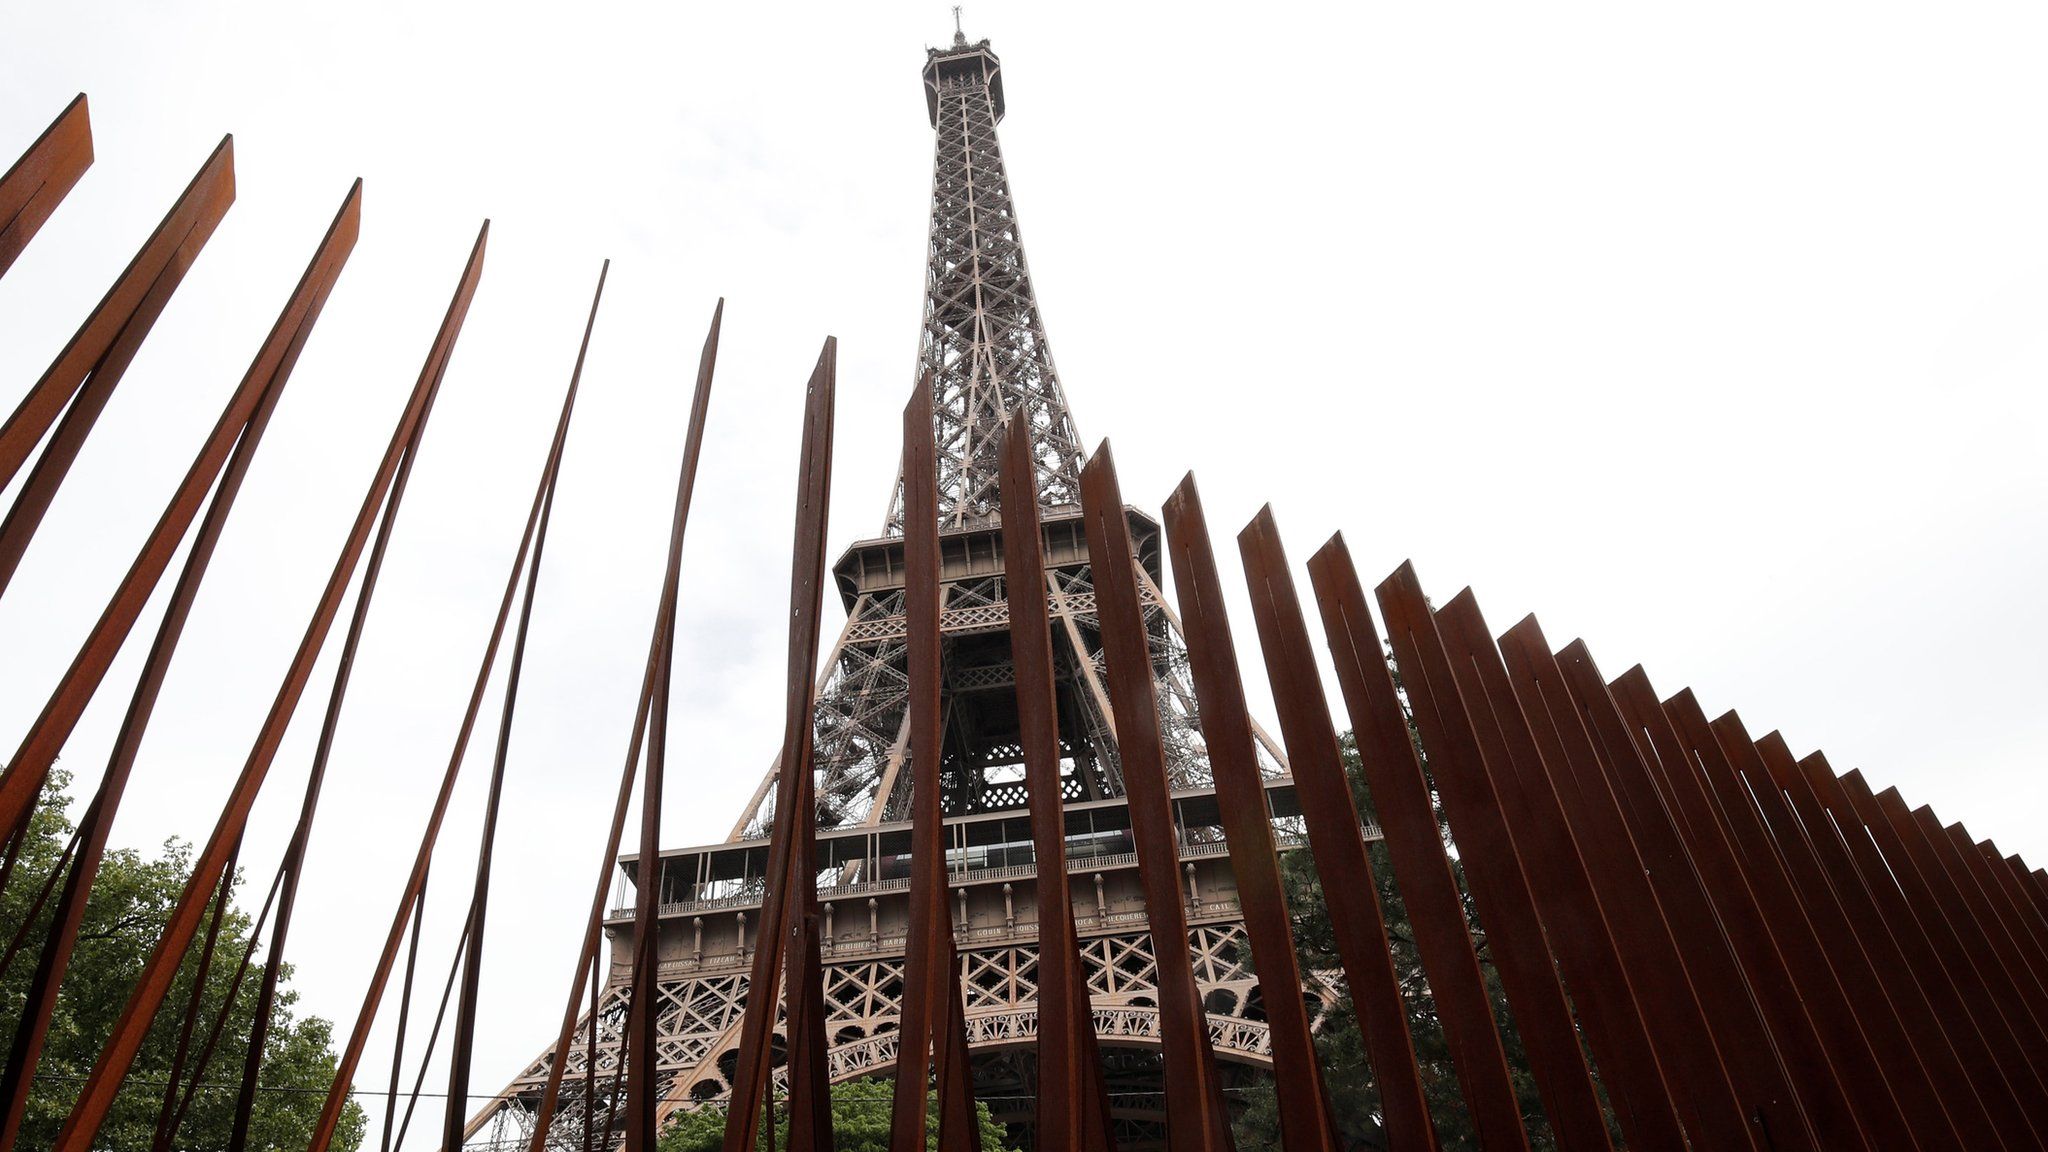 A security steel fence is pictured around the Eiffel Tower in Paris, France, June 14, 2018